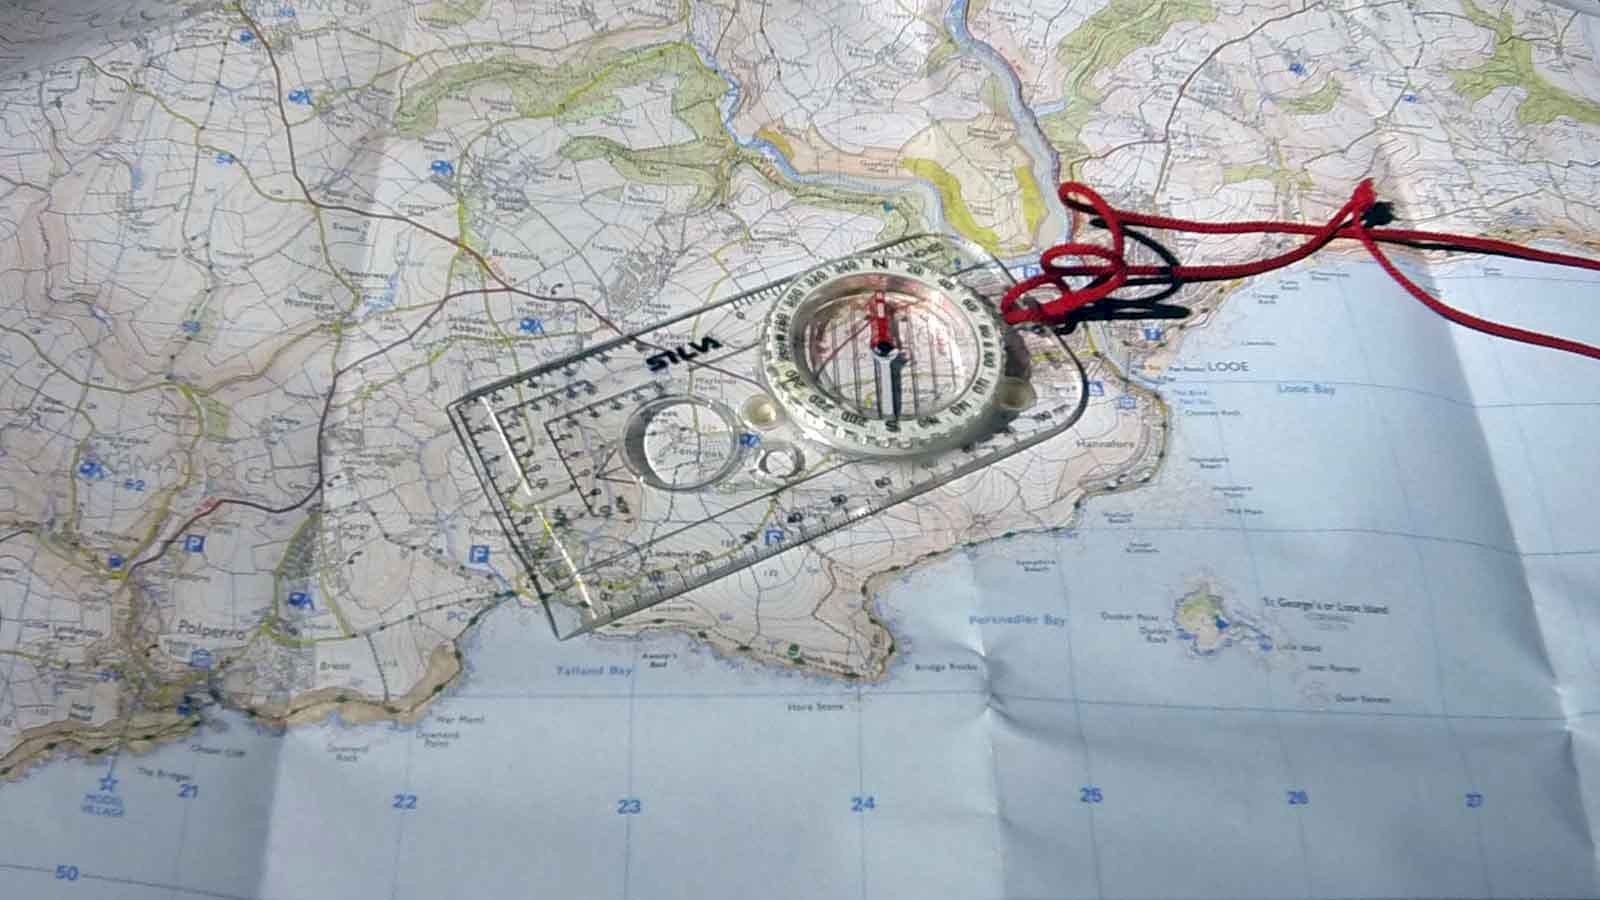 A Silva compass on top of a 1:25,000 OS Explorer map of South East Cornwall, aligned in West South Westerly direction along the measured nautical mile between Looe and Polperro.